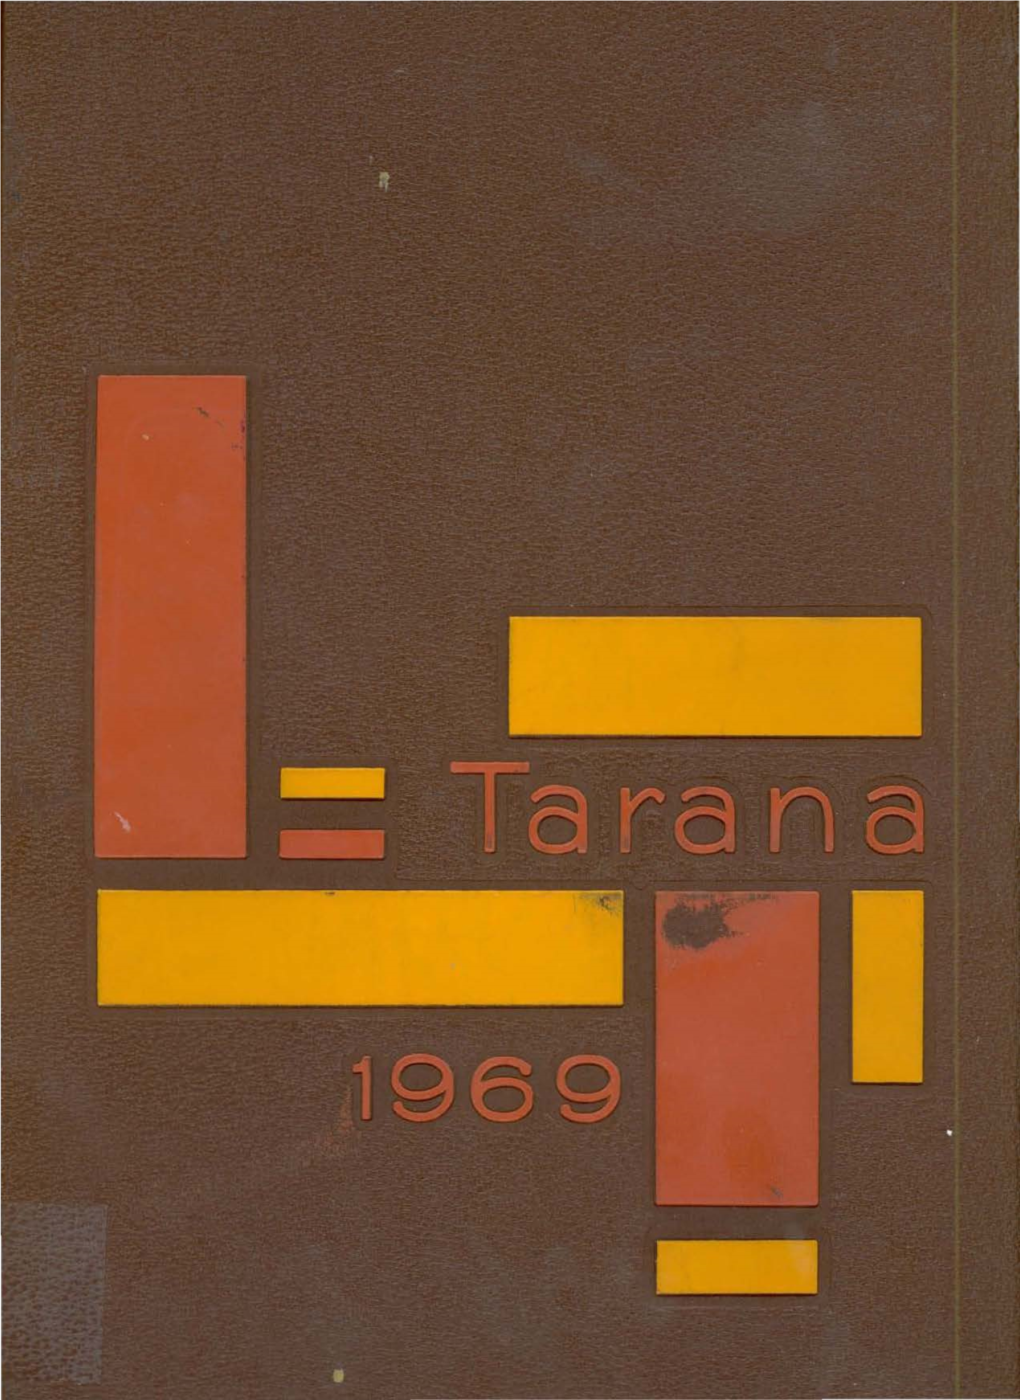 1969 Tarana Reflects the Col­ Lective Change in Attitudes and Ac­ Tions